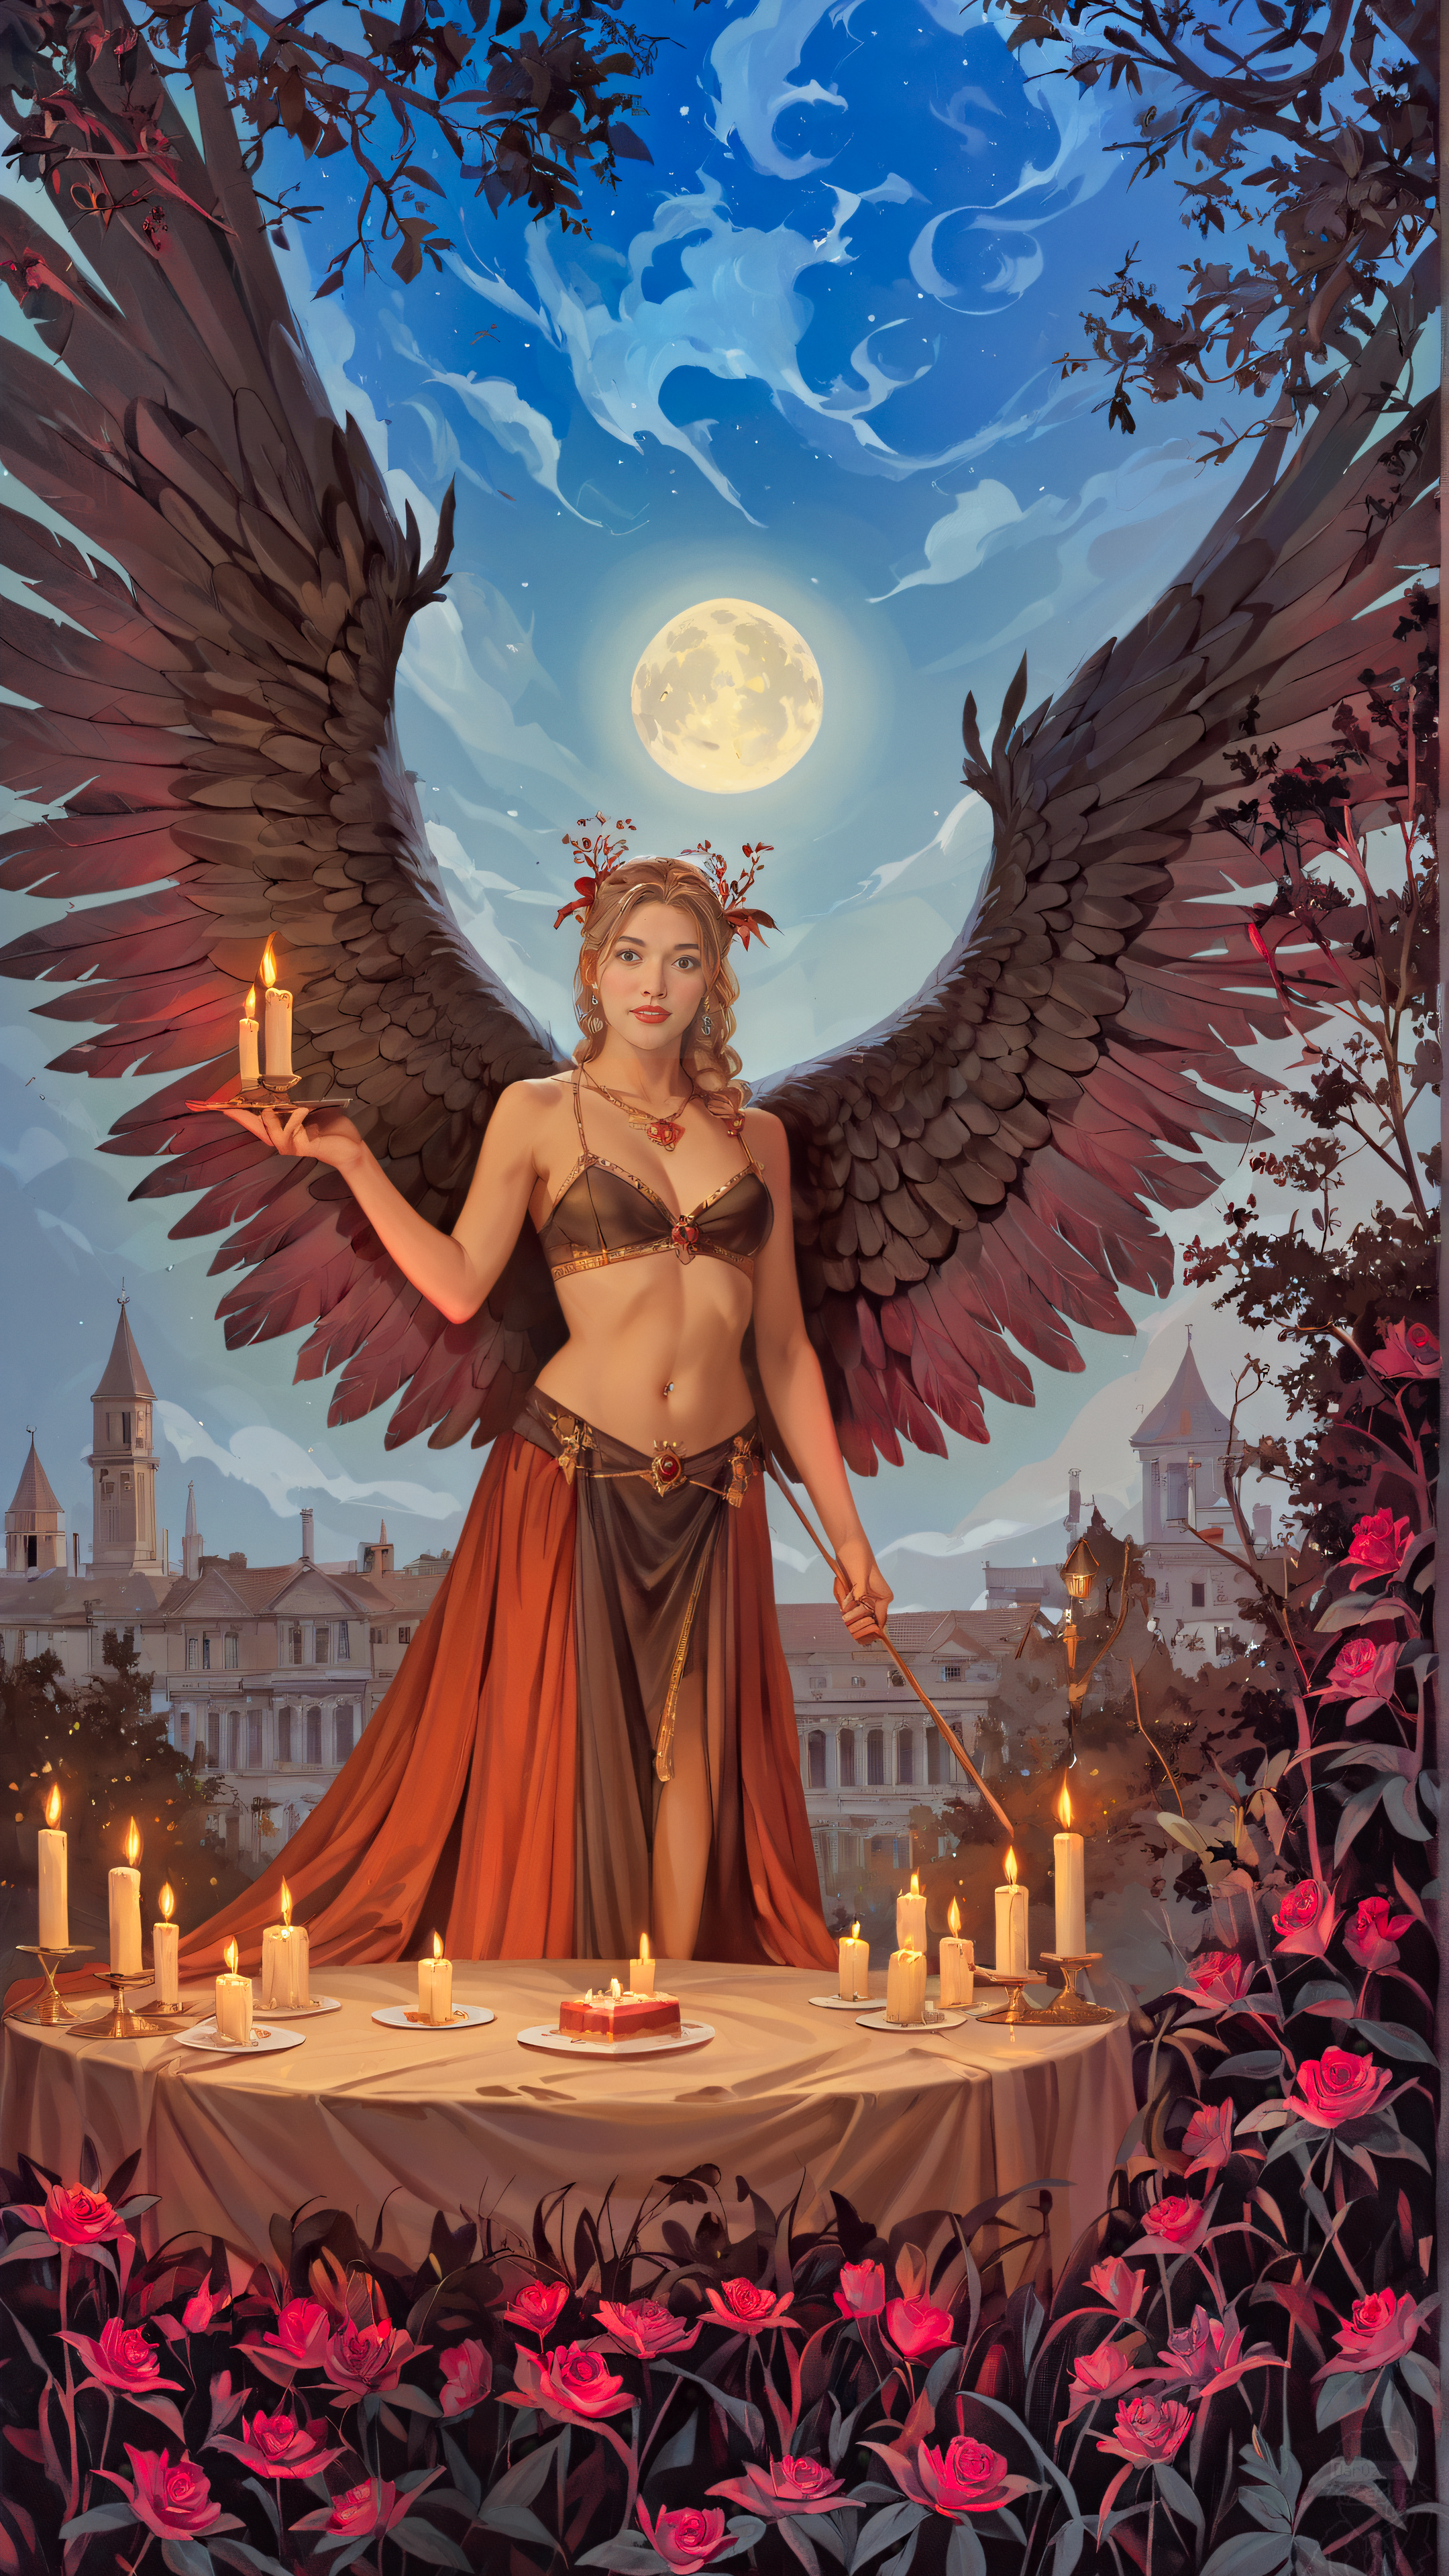 General 2160x3840 AI art digital art dar0z artwork illustration wings standing brown eyes bra sleeveless candles food table rose plants castle Moon night clouds looking at viewer belly button necklace sword blonde